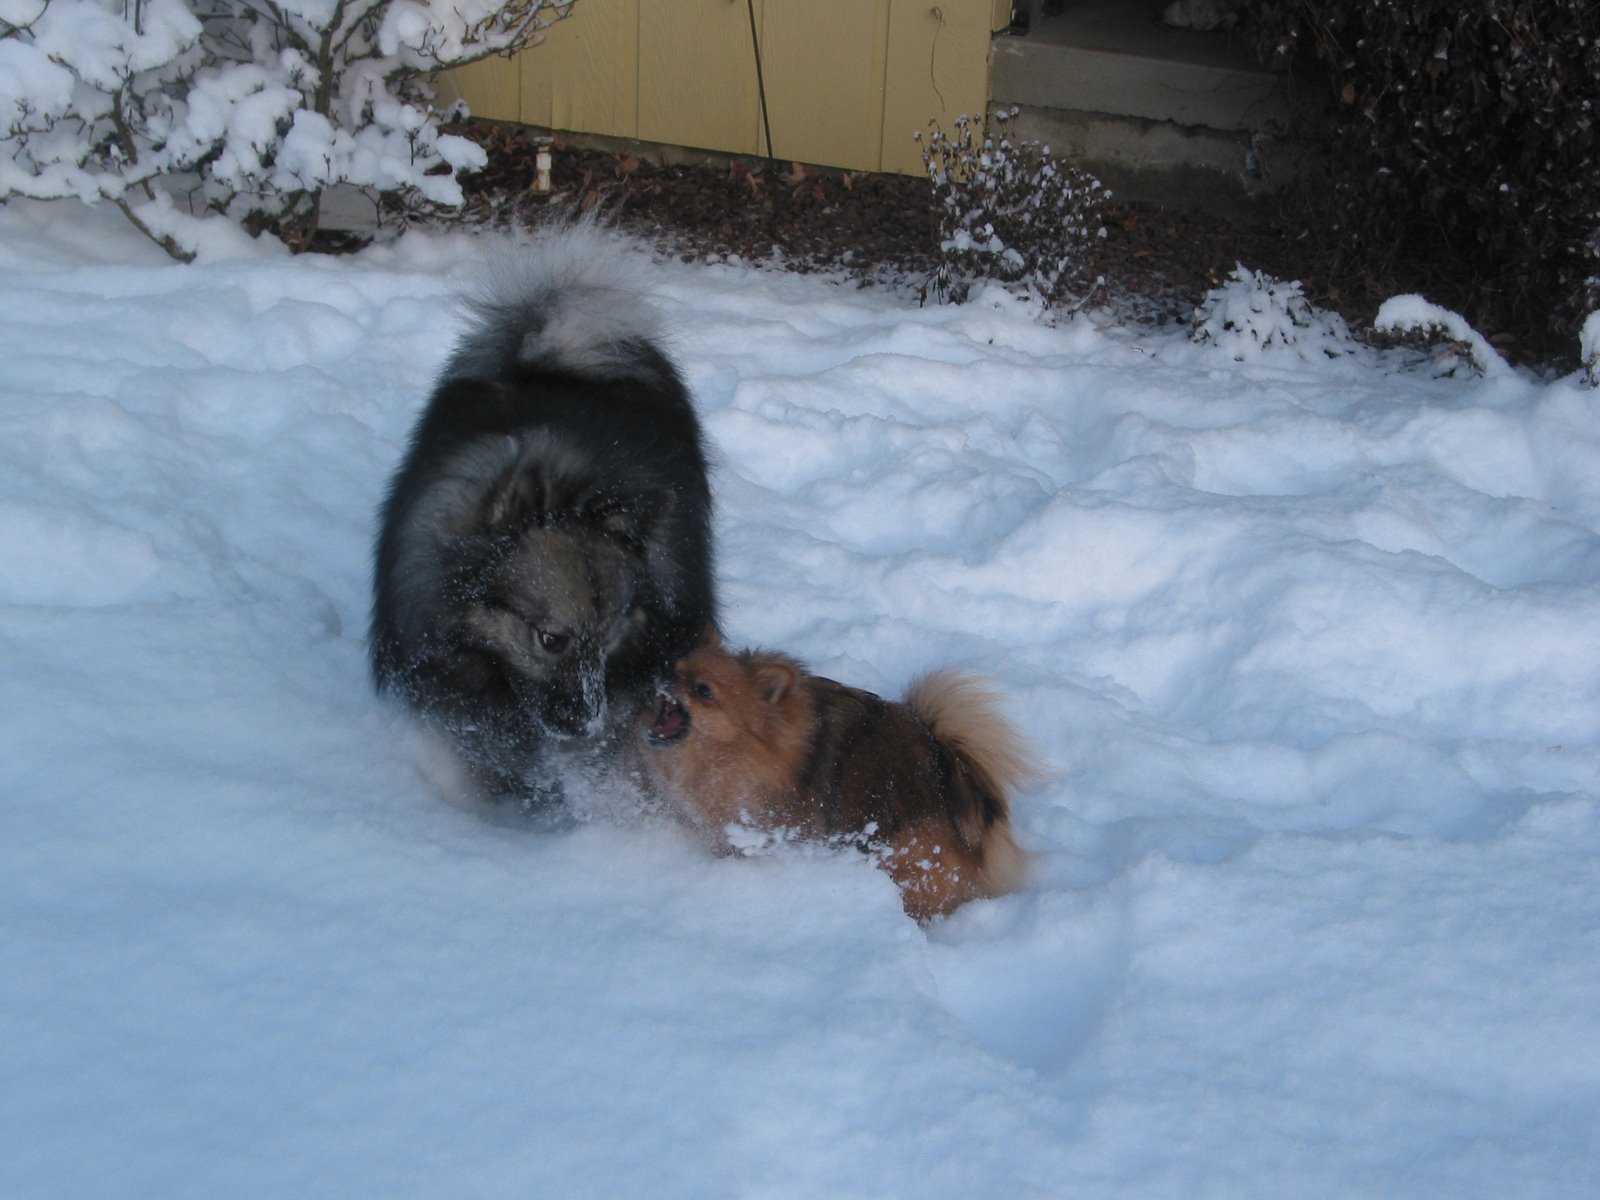 [sadie+and+peaches+in+snow.JPG]